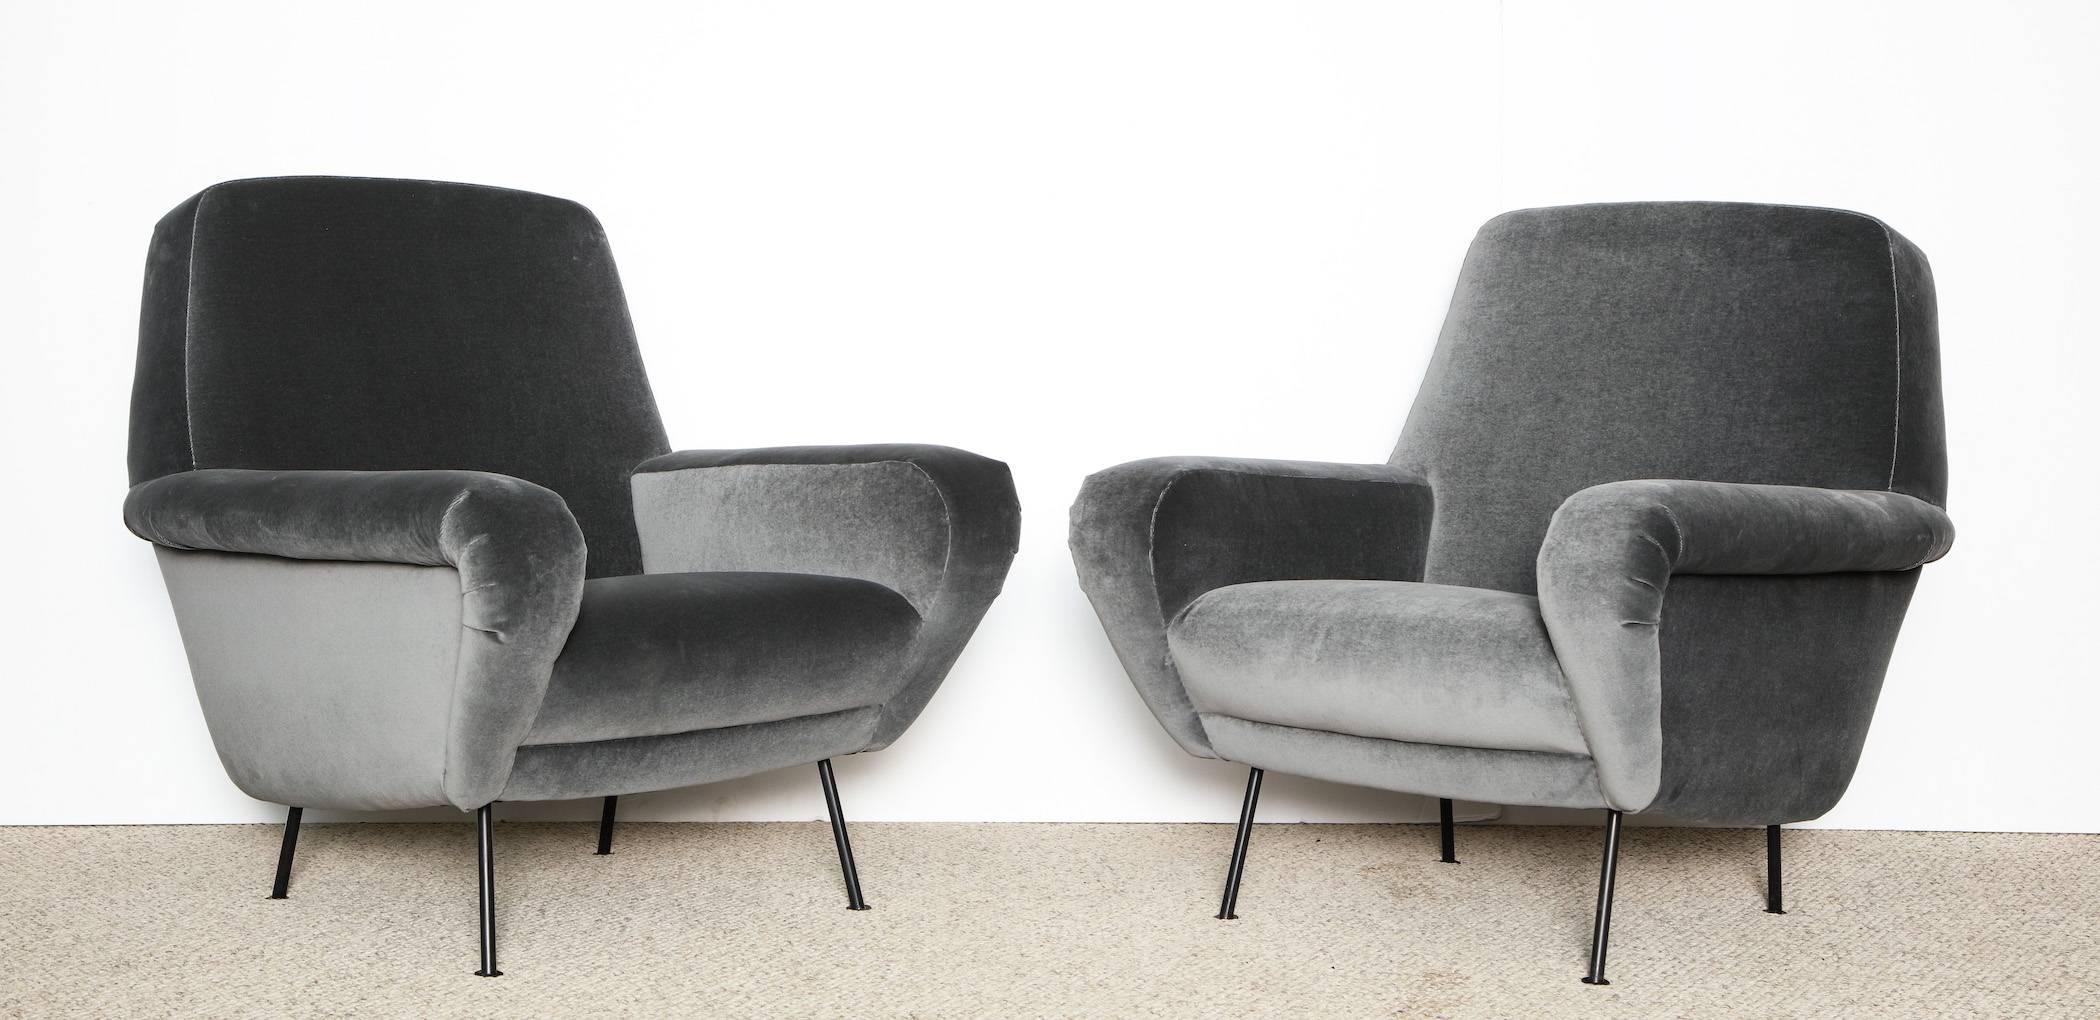 Rare pair of #830 armchairs by Gianfranco Frattini.
Upholstered armchairs with wide arms and black painted metal legs. Produced by Cassina, and recently reupholstered in gray velvet.